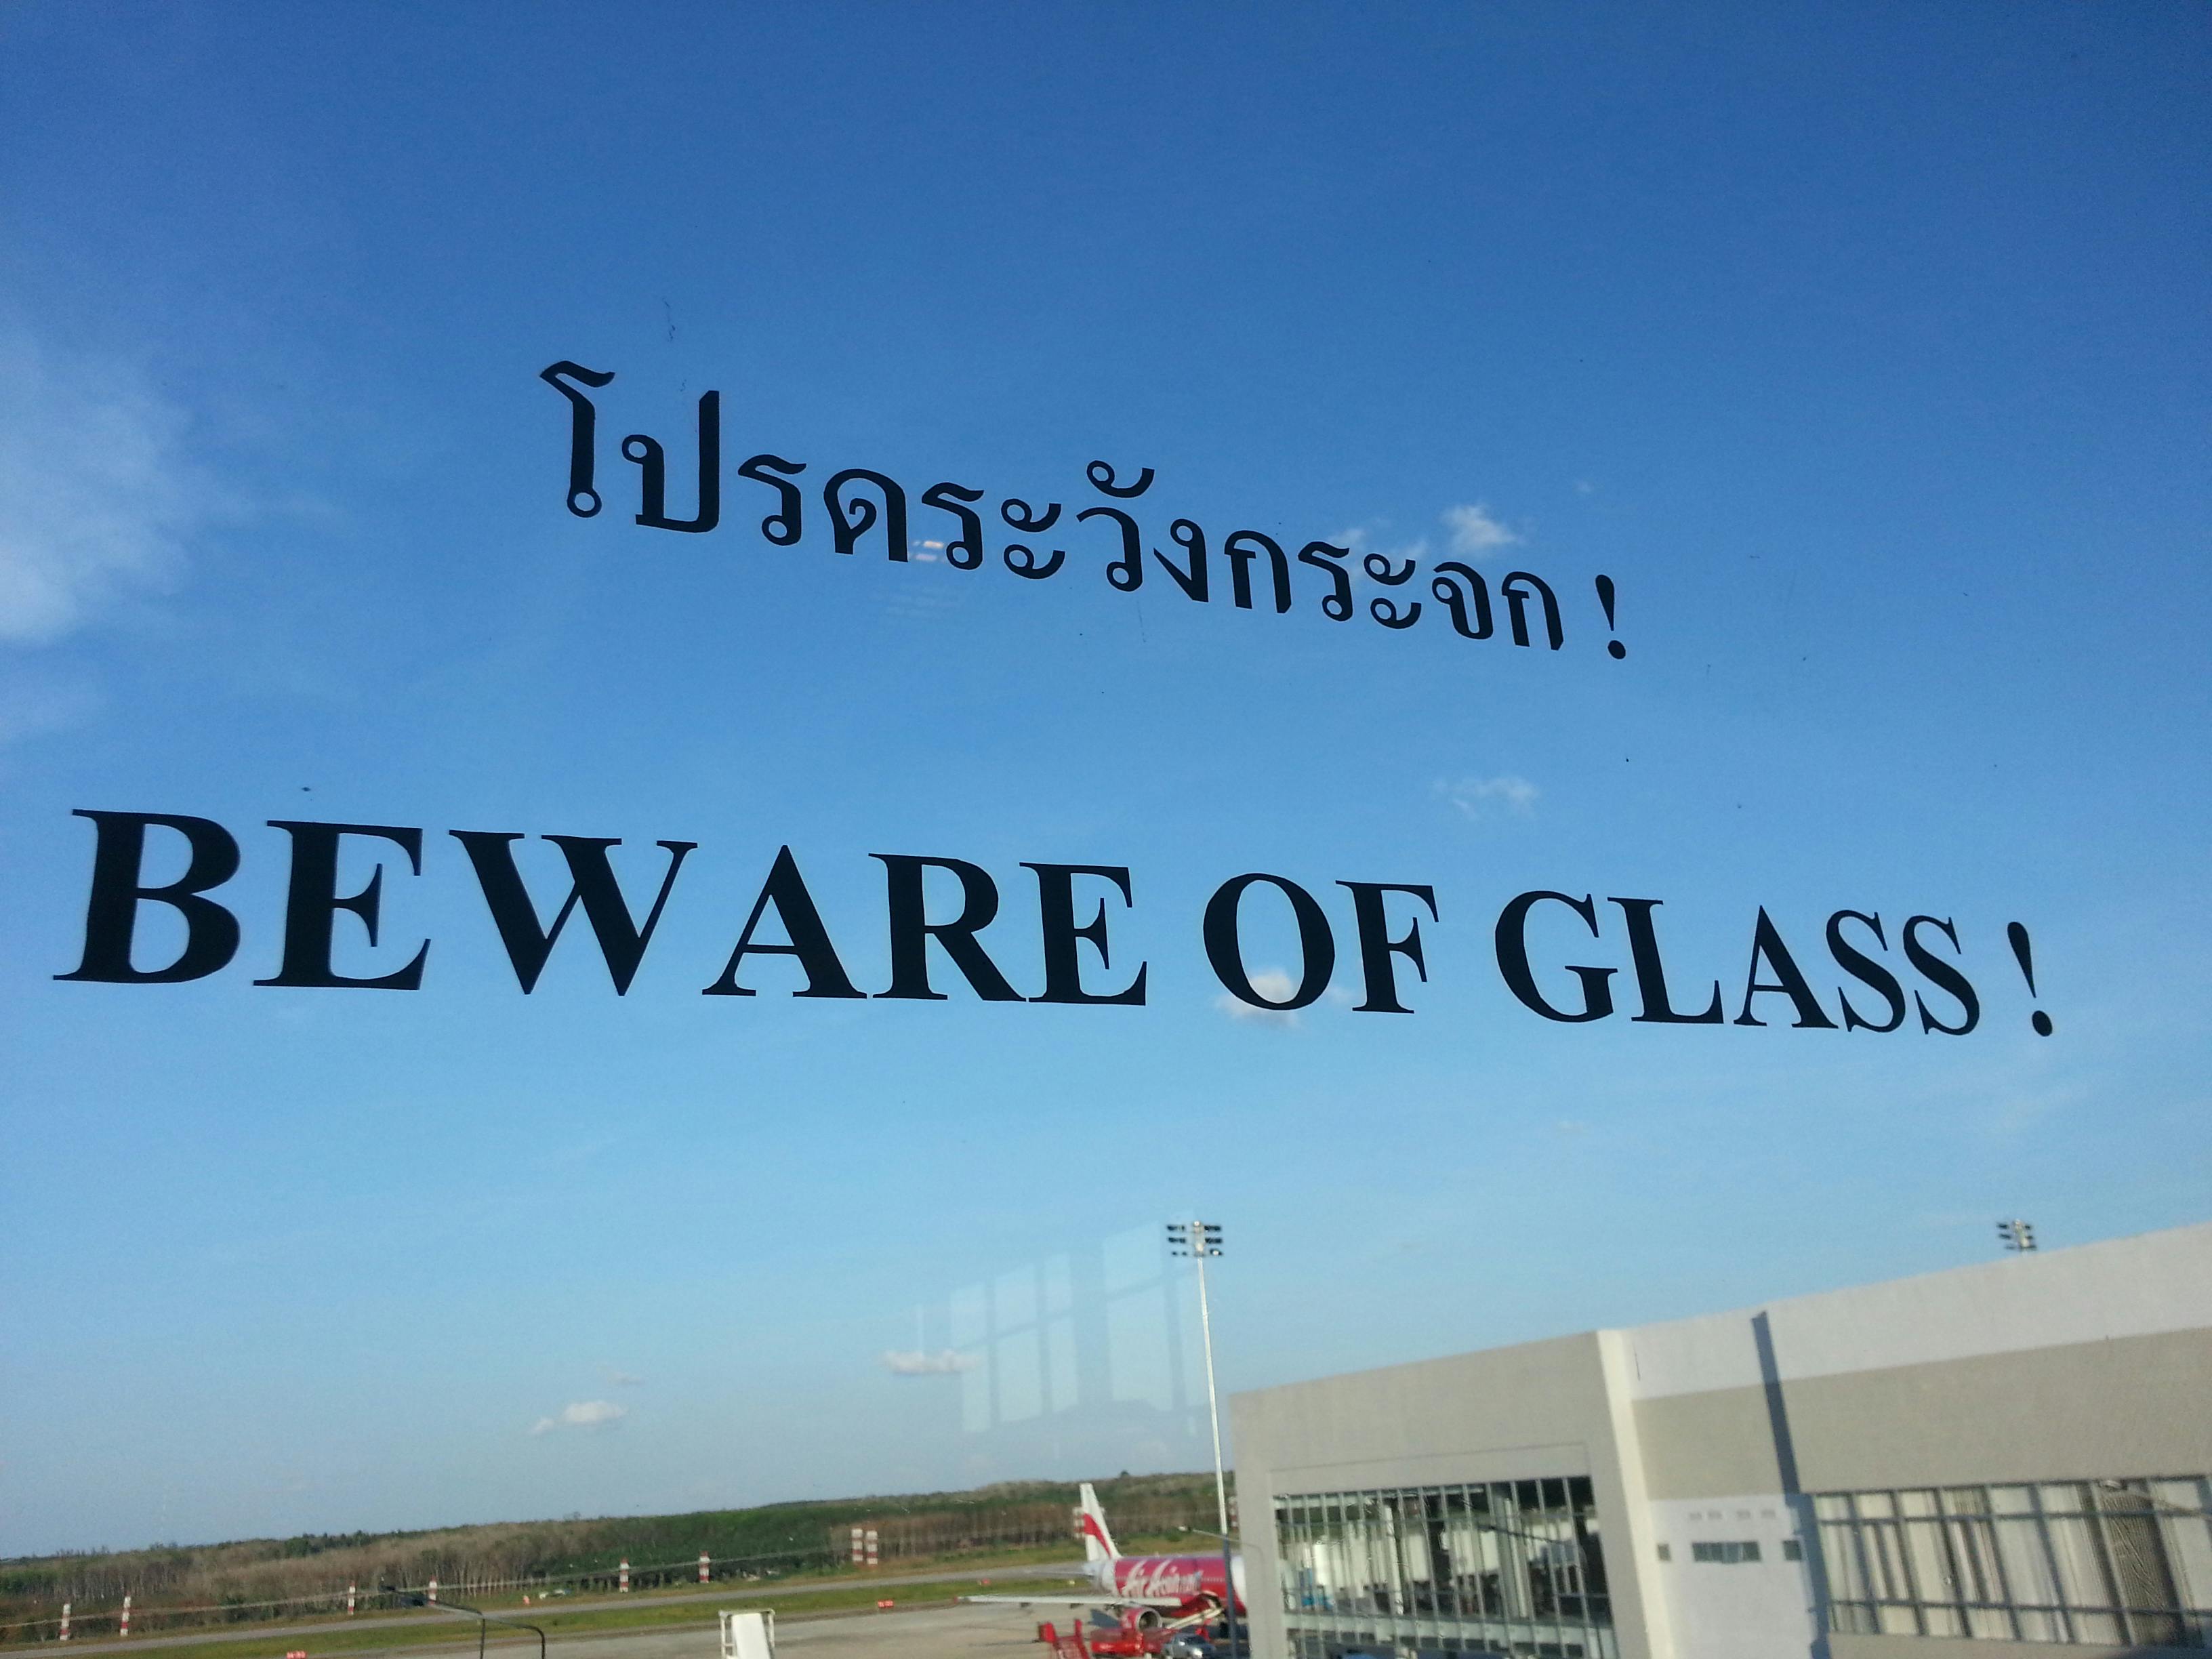 A pointless warning on a glass wall